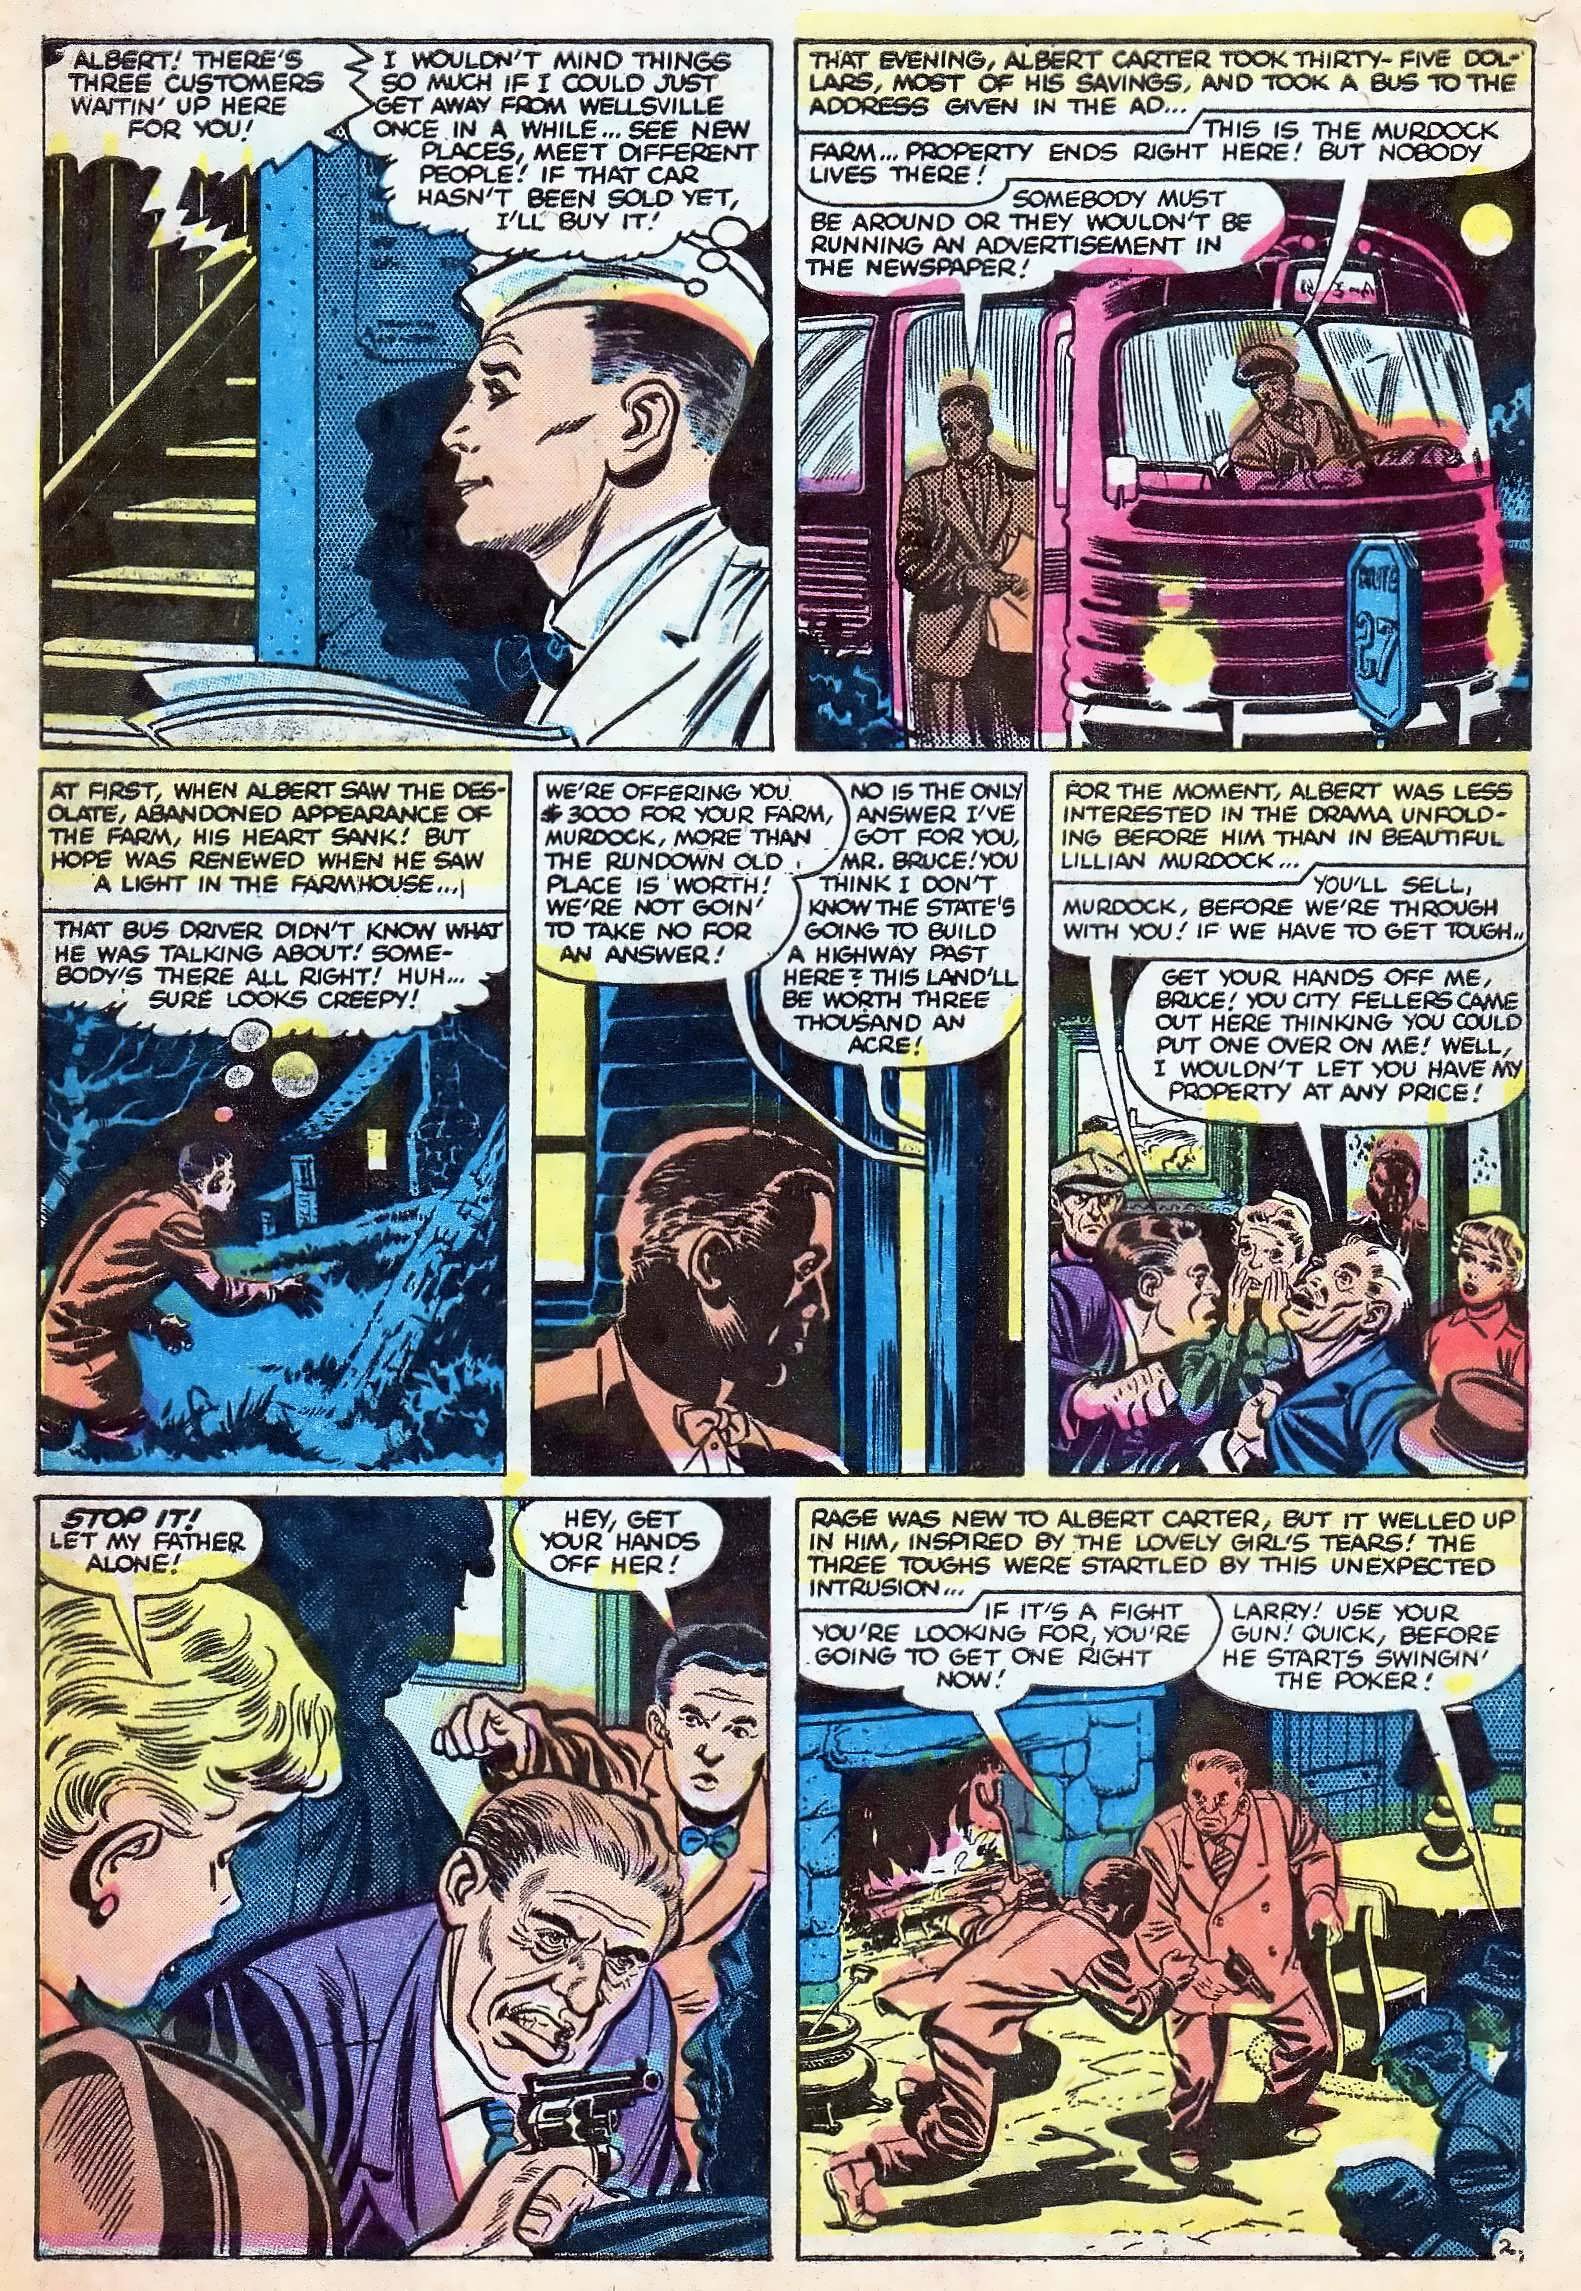 Marvel Tales (1949) 157 Page 3